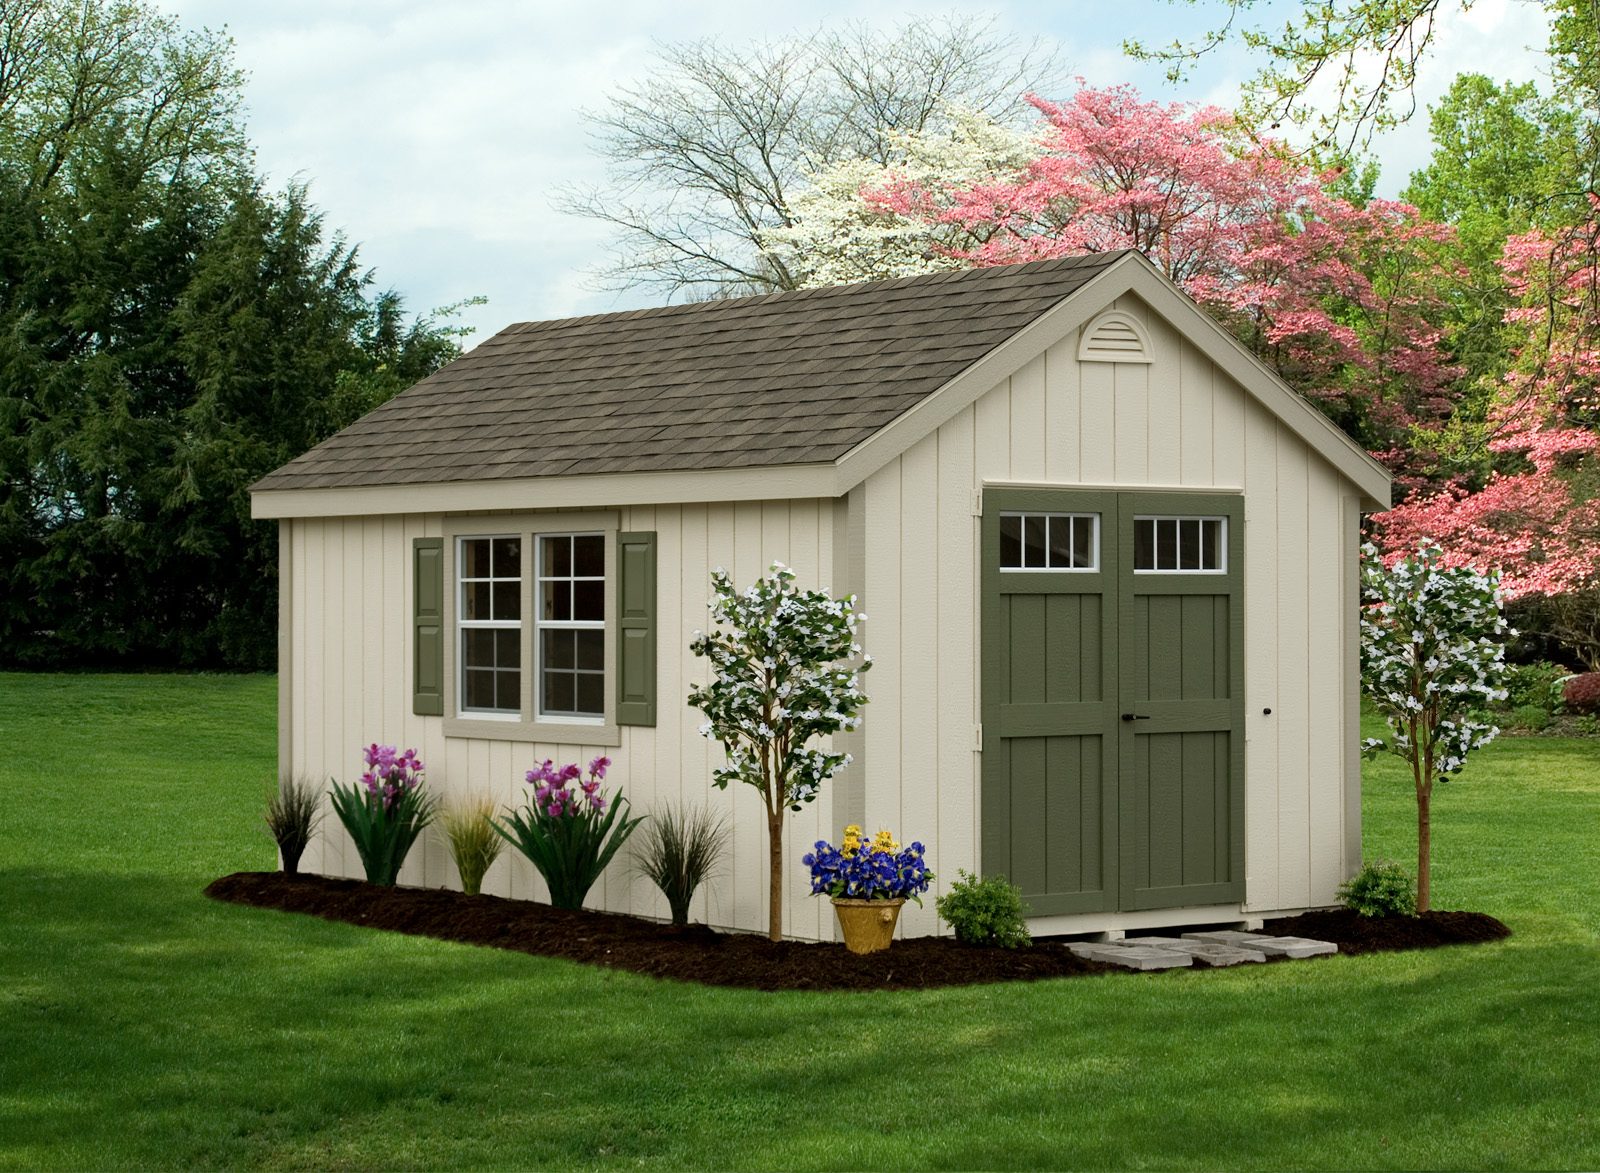 2020 model garden shed for sale in minneopolis, mn and